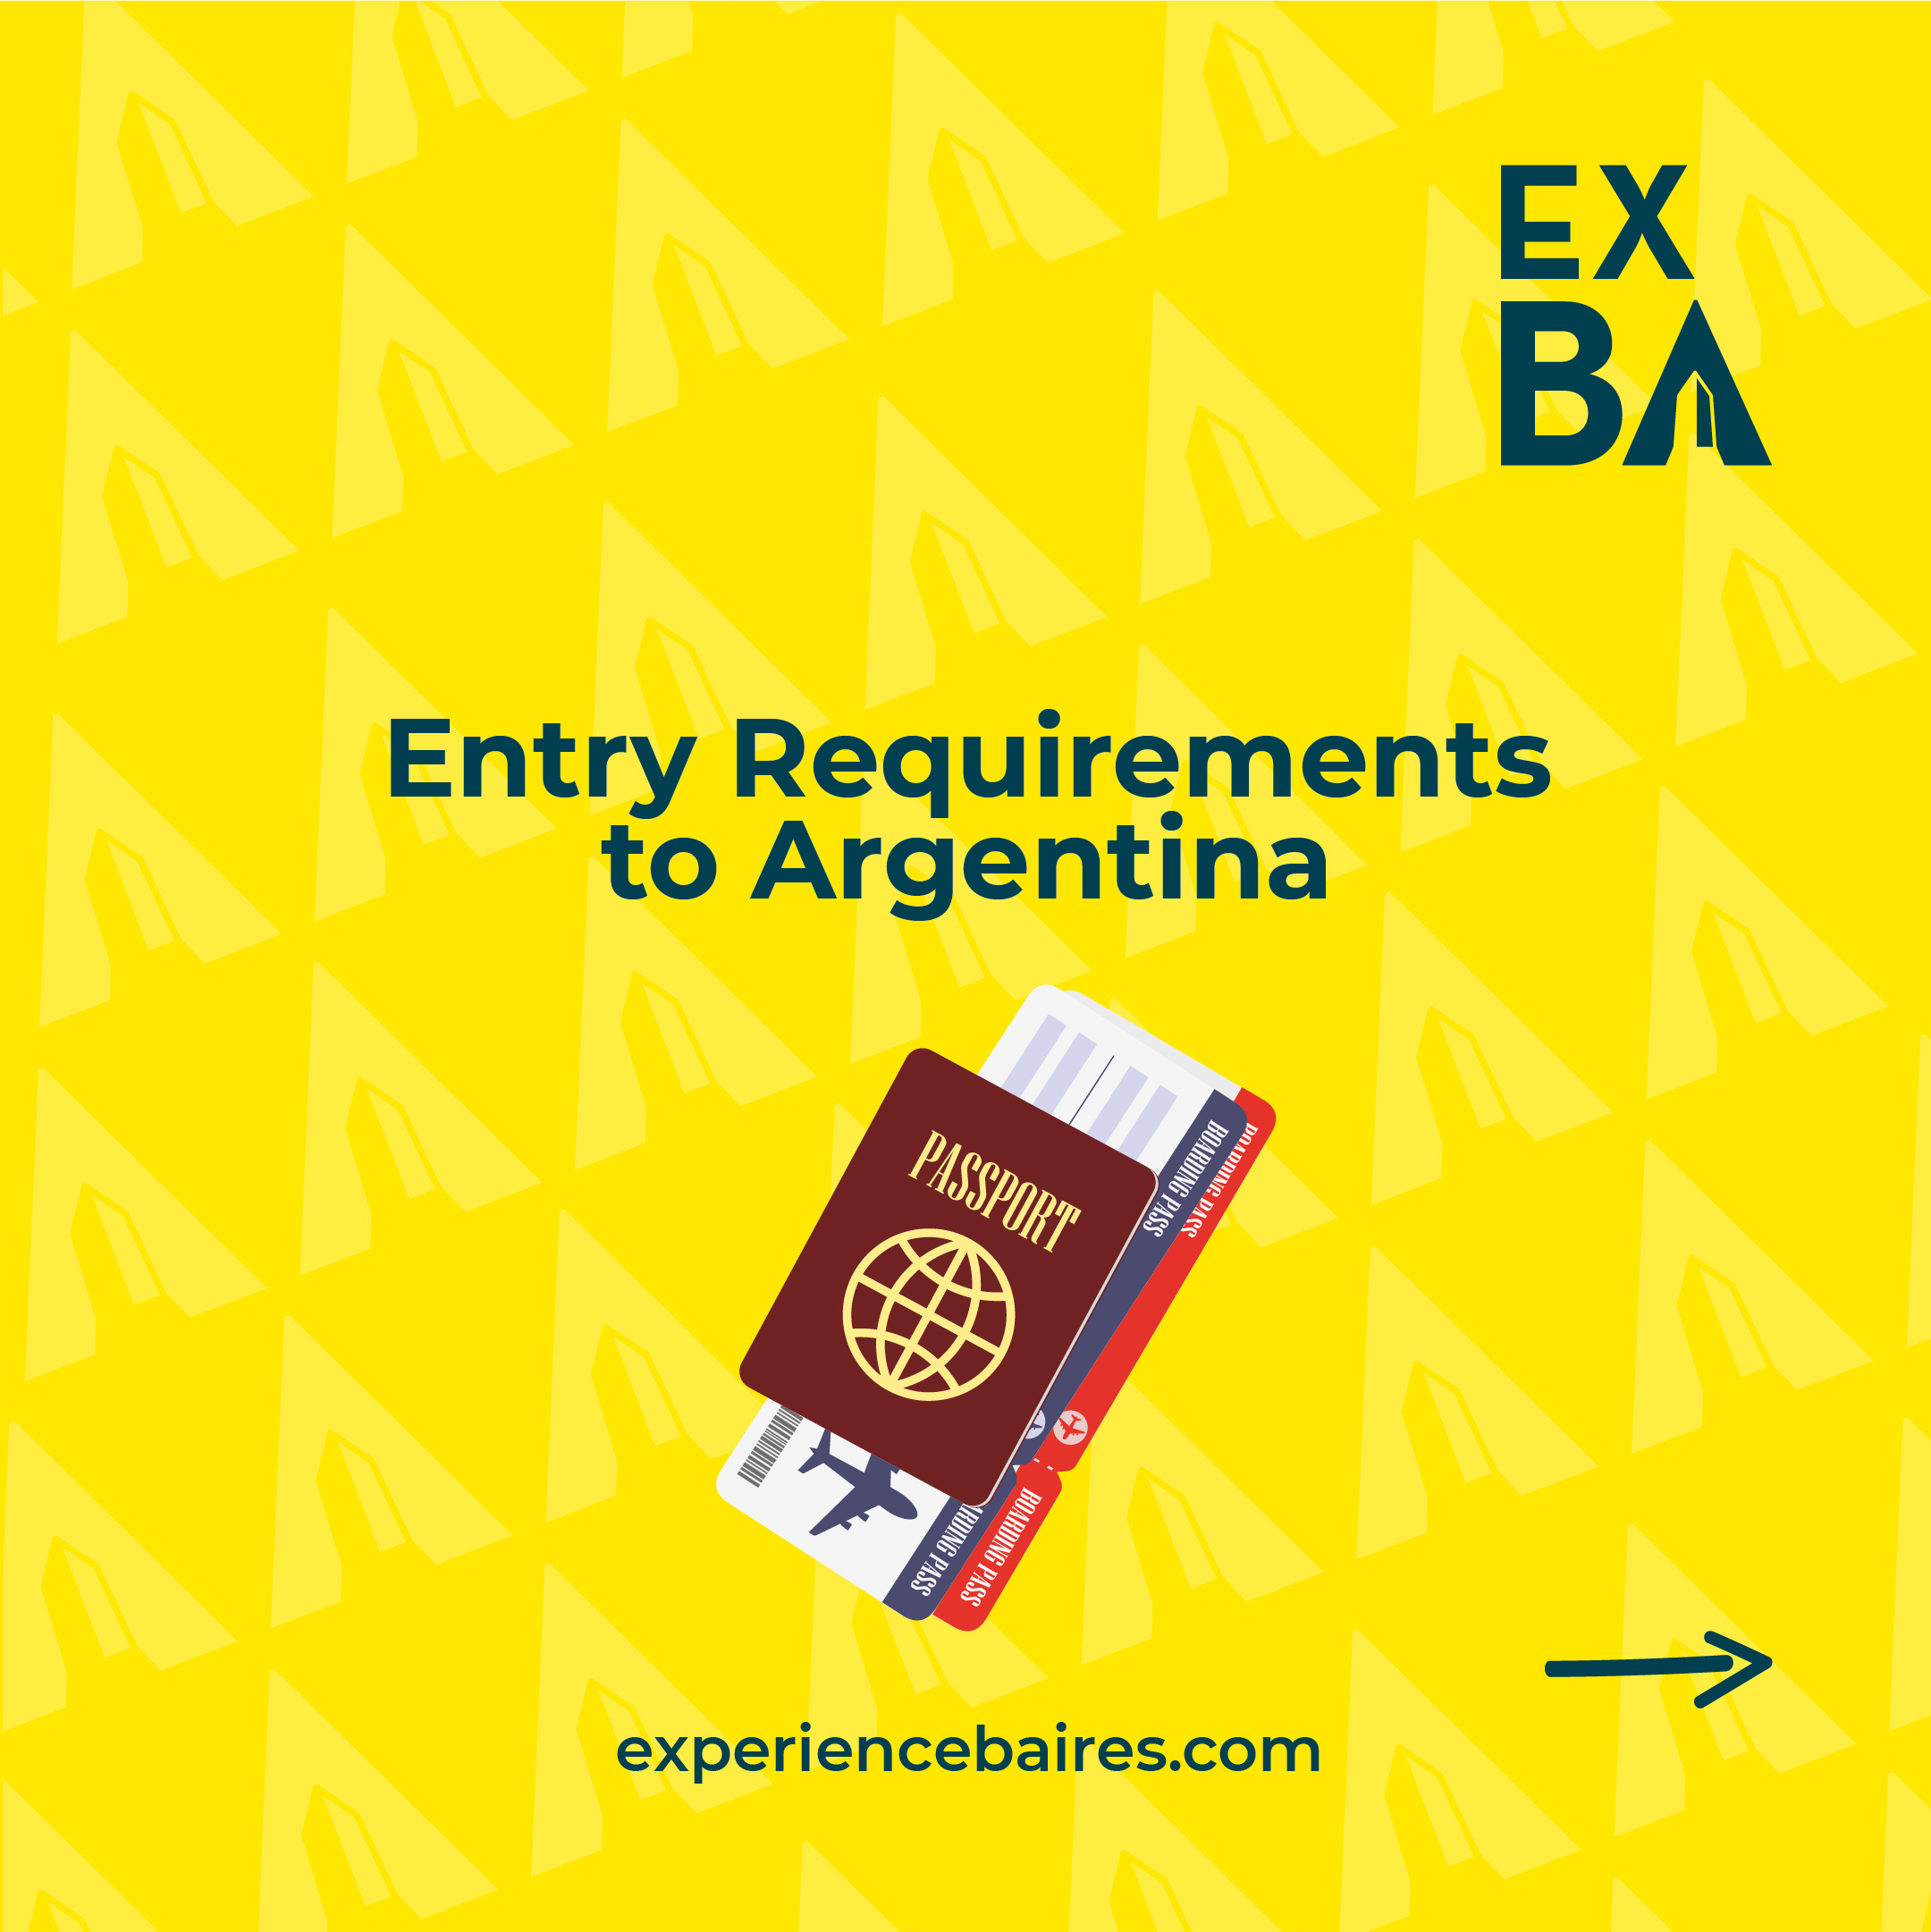 You are currently viewing Entry Requirements to Argentina starting from January 29, 2022.